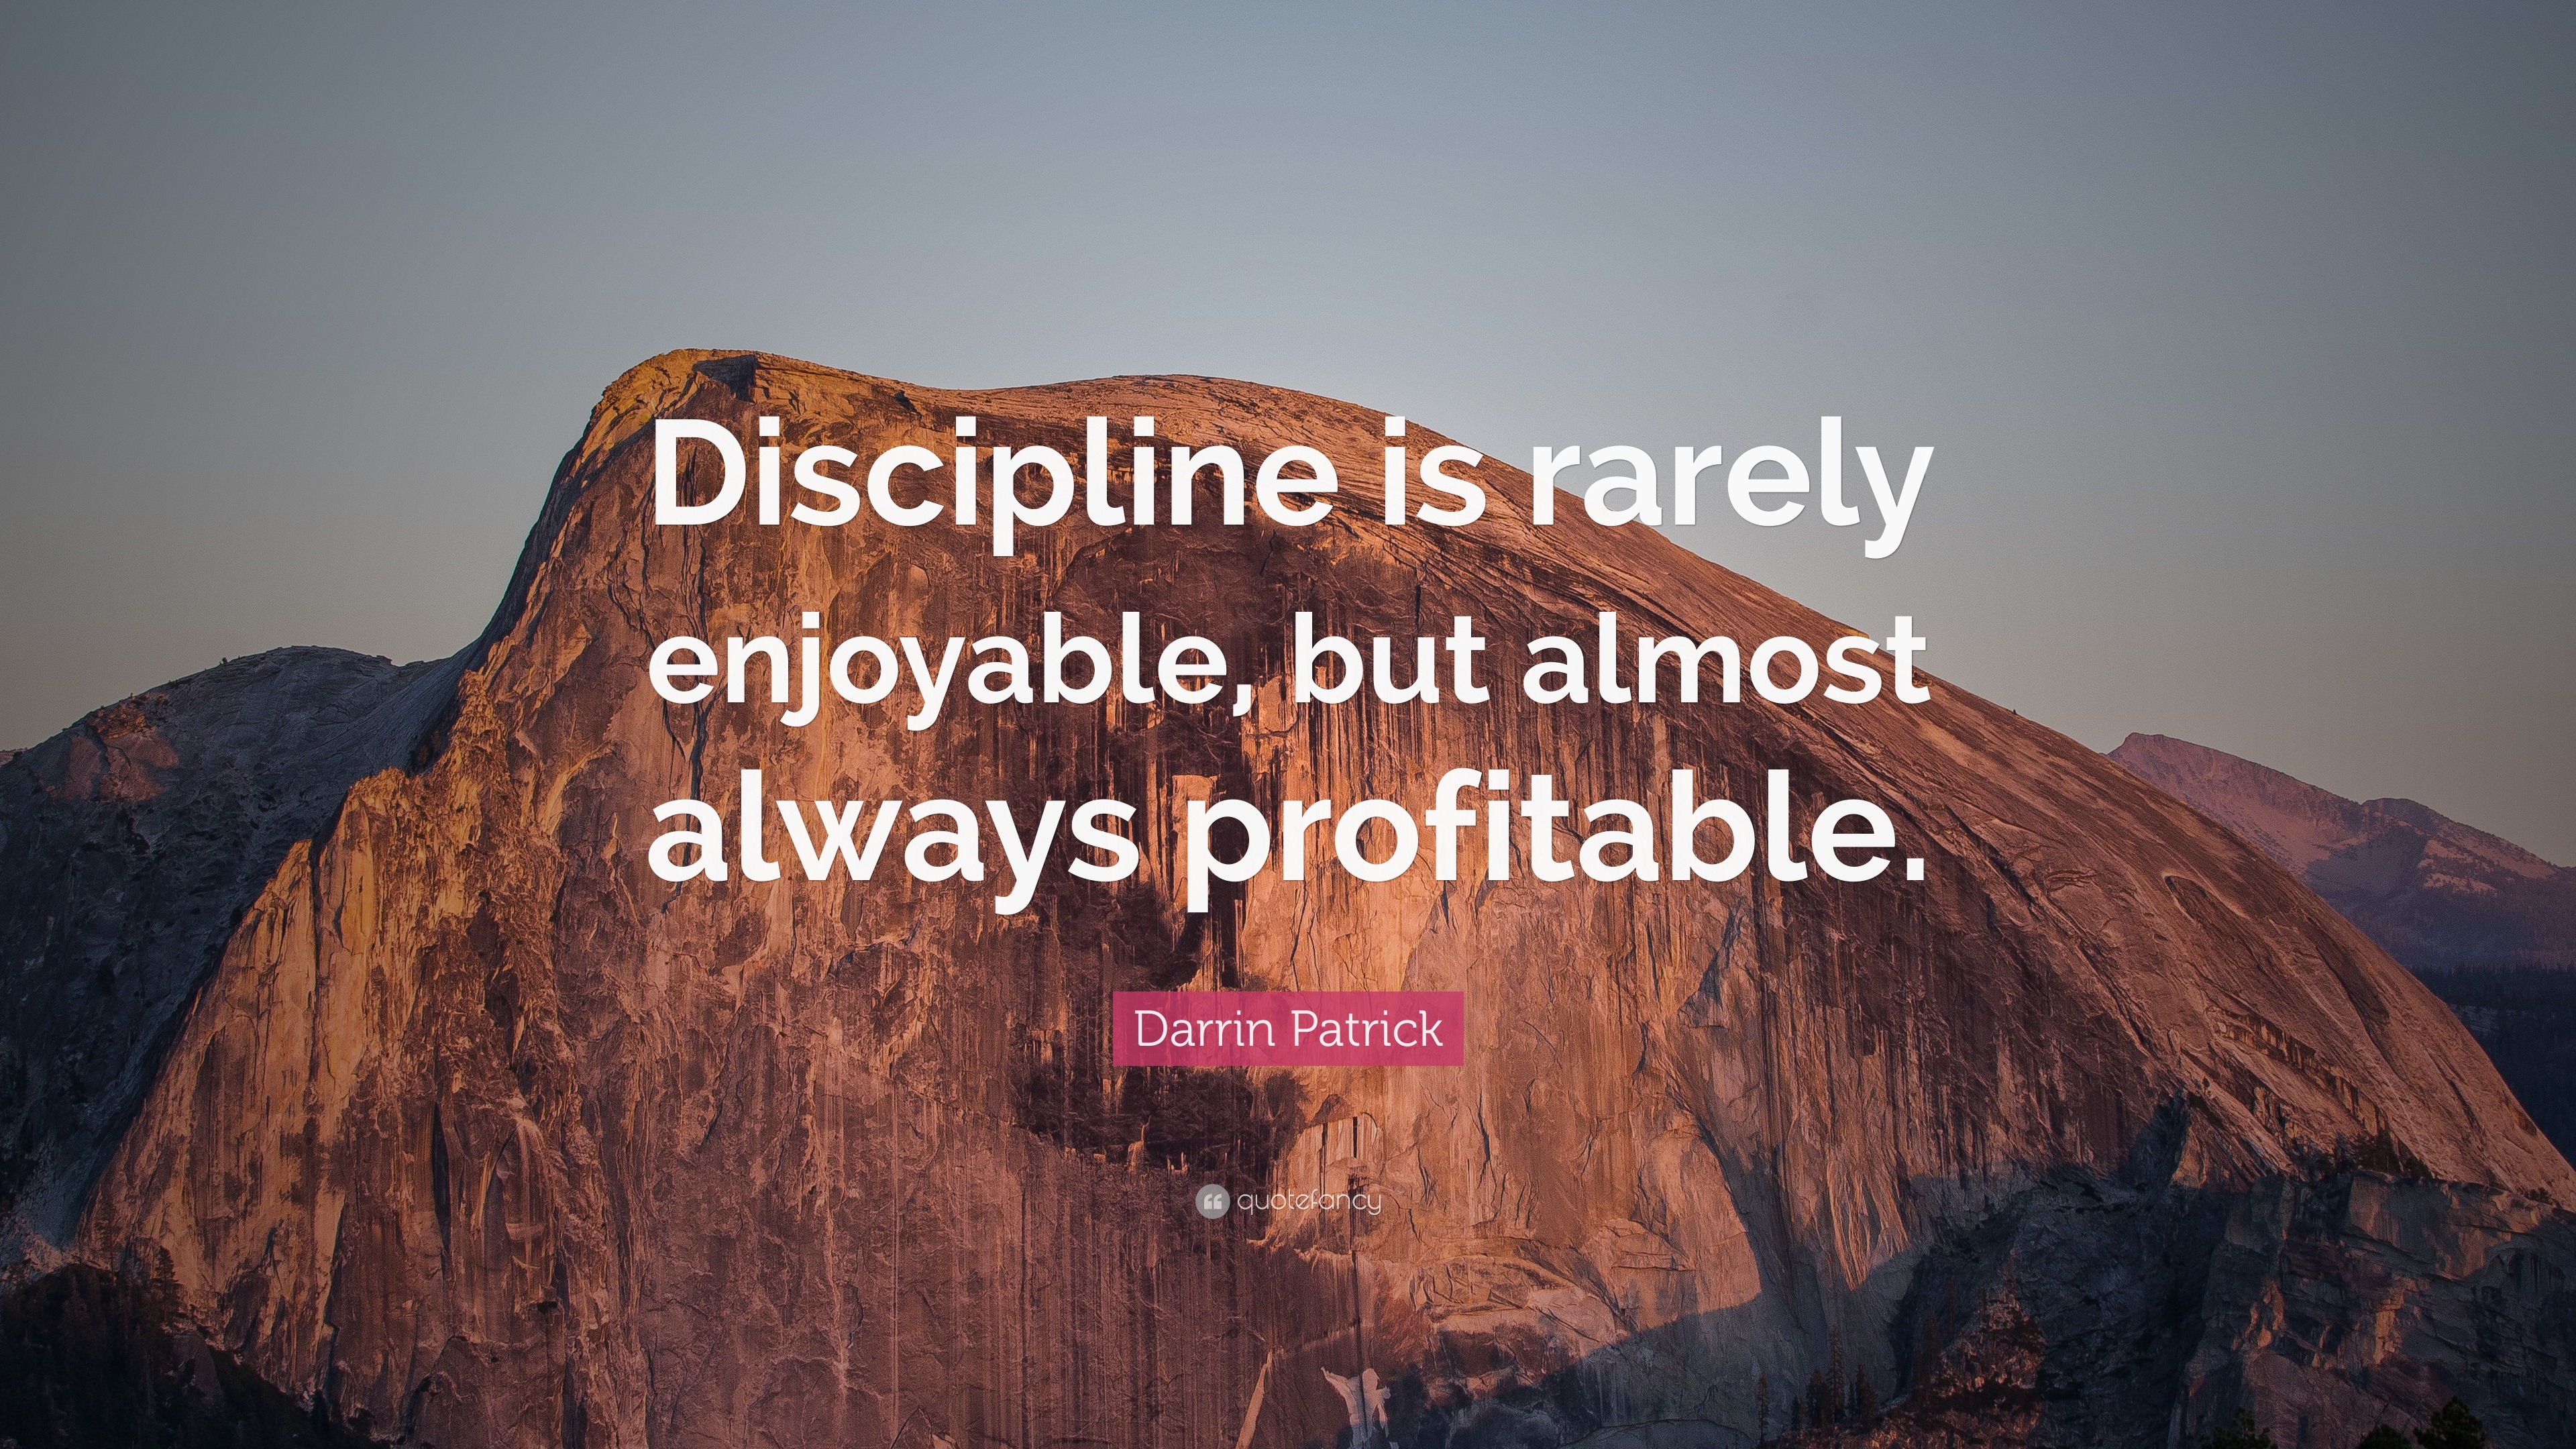 Darrin Patrick Quote: “Discipline is rarely enjoyable, but almost